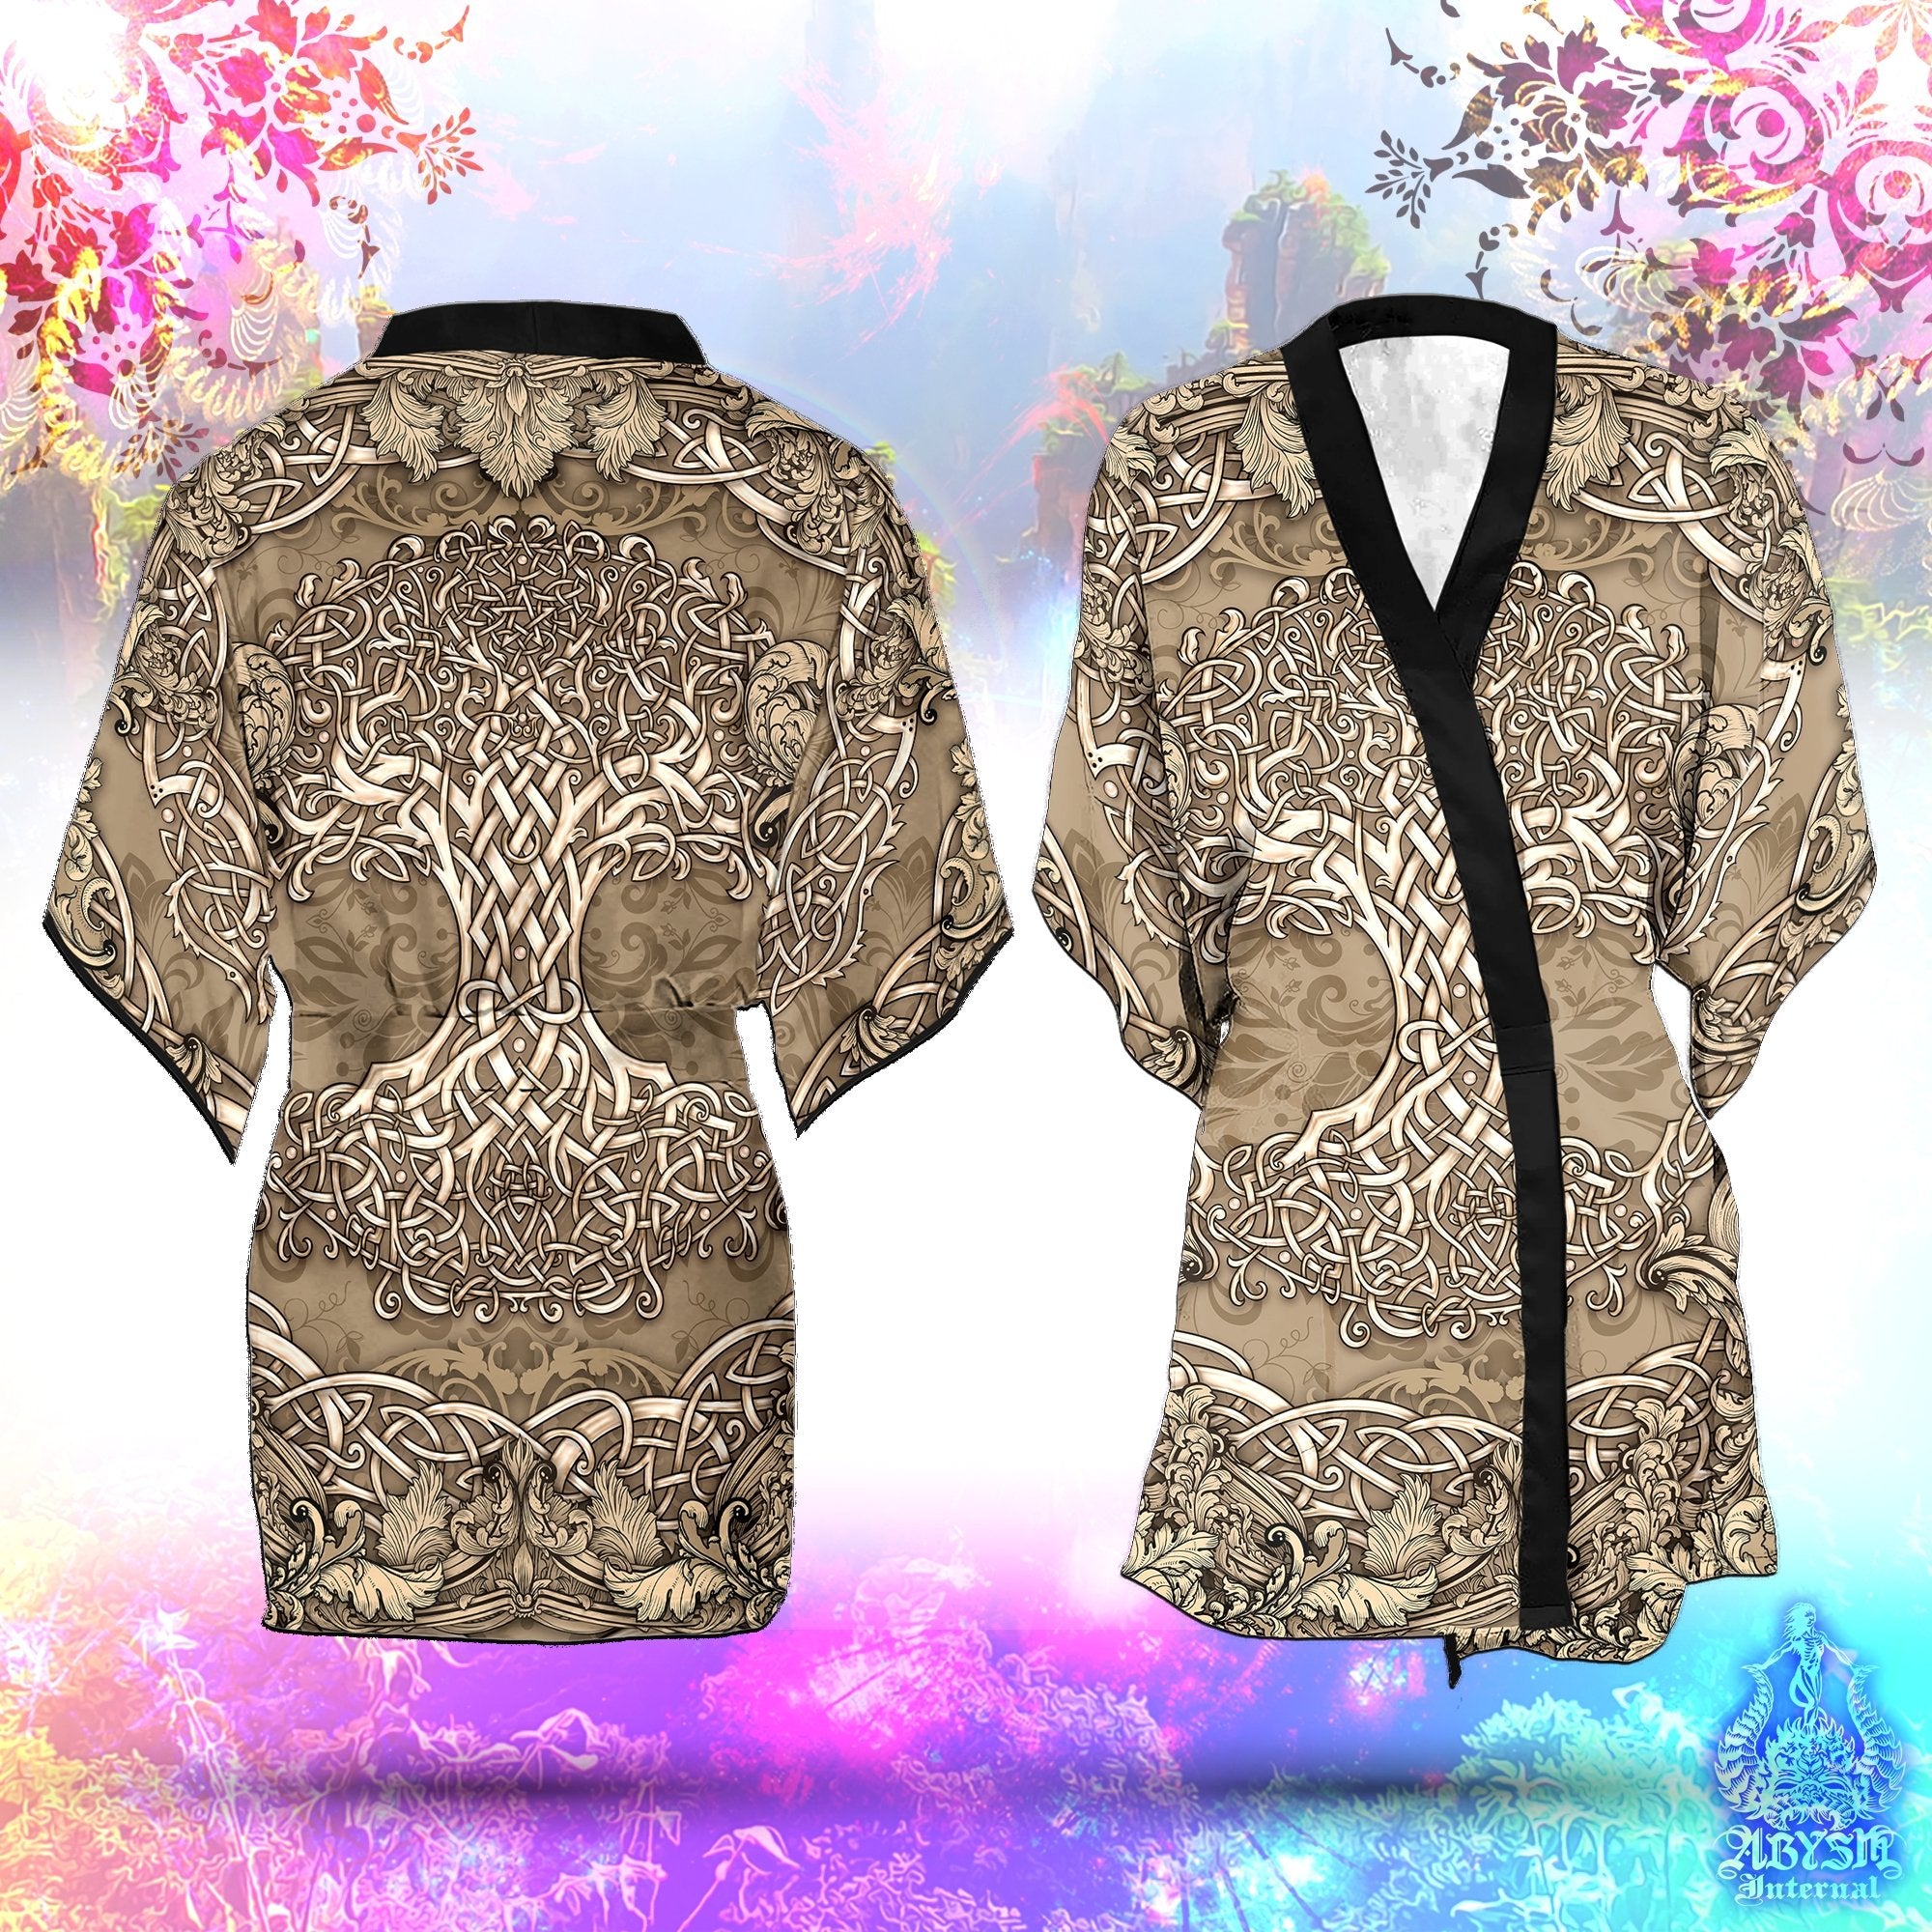 Tree of Life Cover Up, Beach Outfit, Celtic Party Kimono, Wicca Summer Festival Robe, Witchy Indie and Alternative Clothing, Unisex - Cream - Abysm Internal